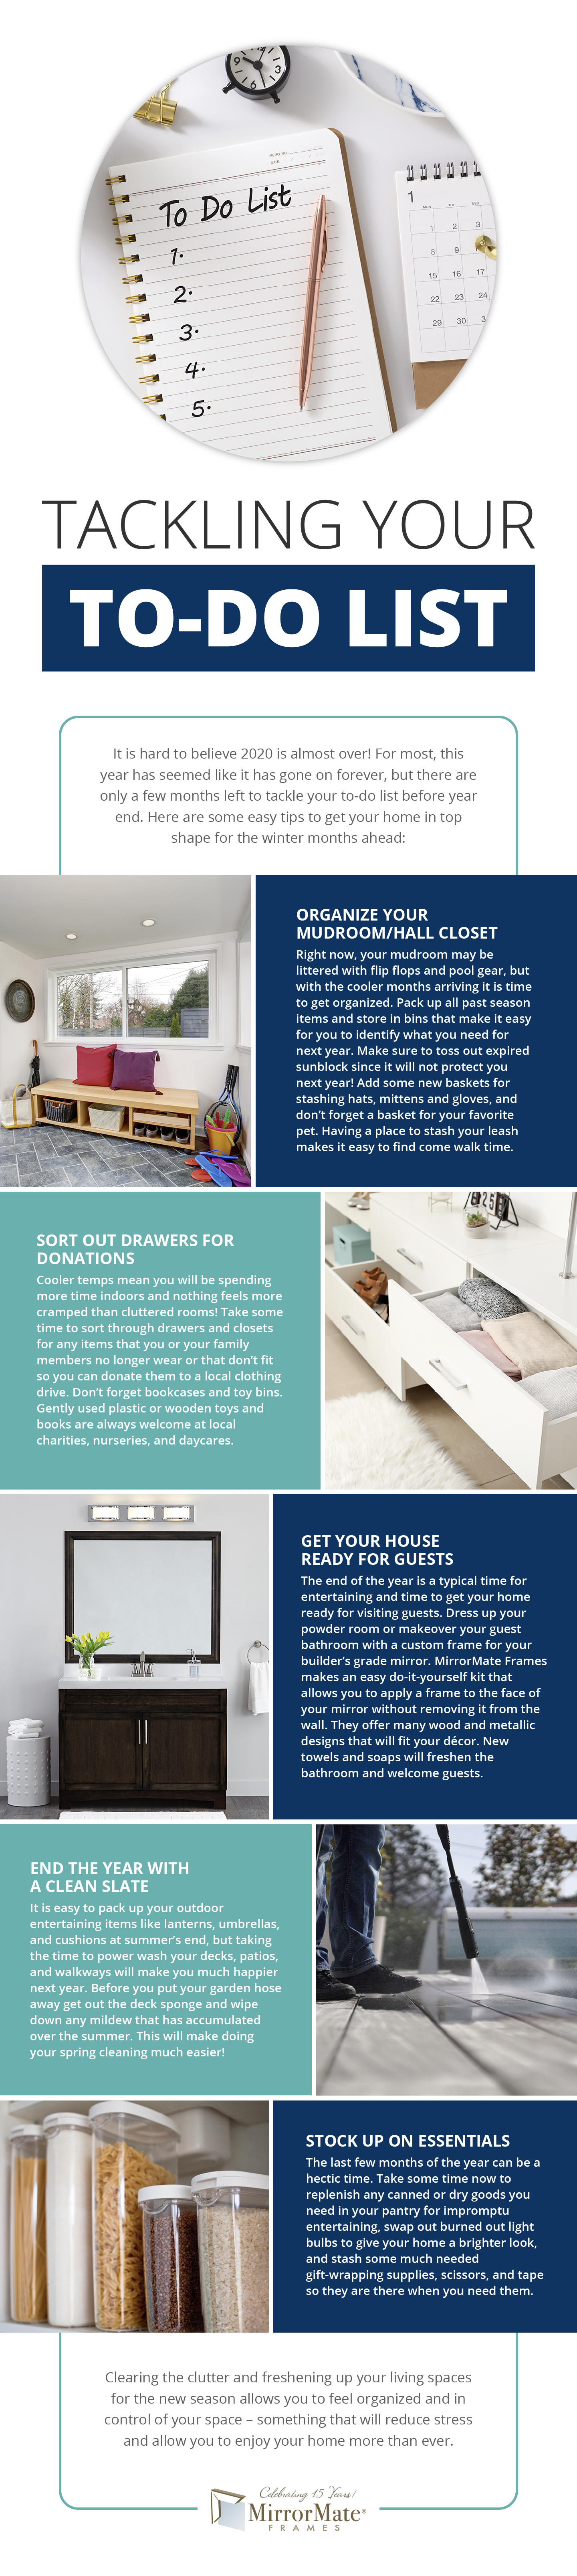 Tackling Your Home To Do List Infographic